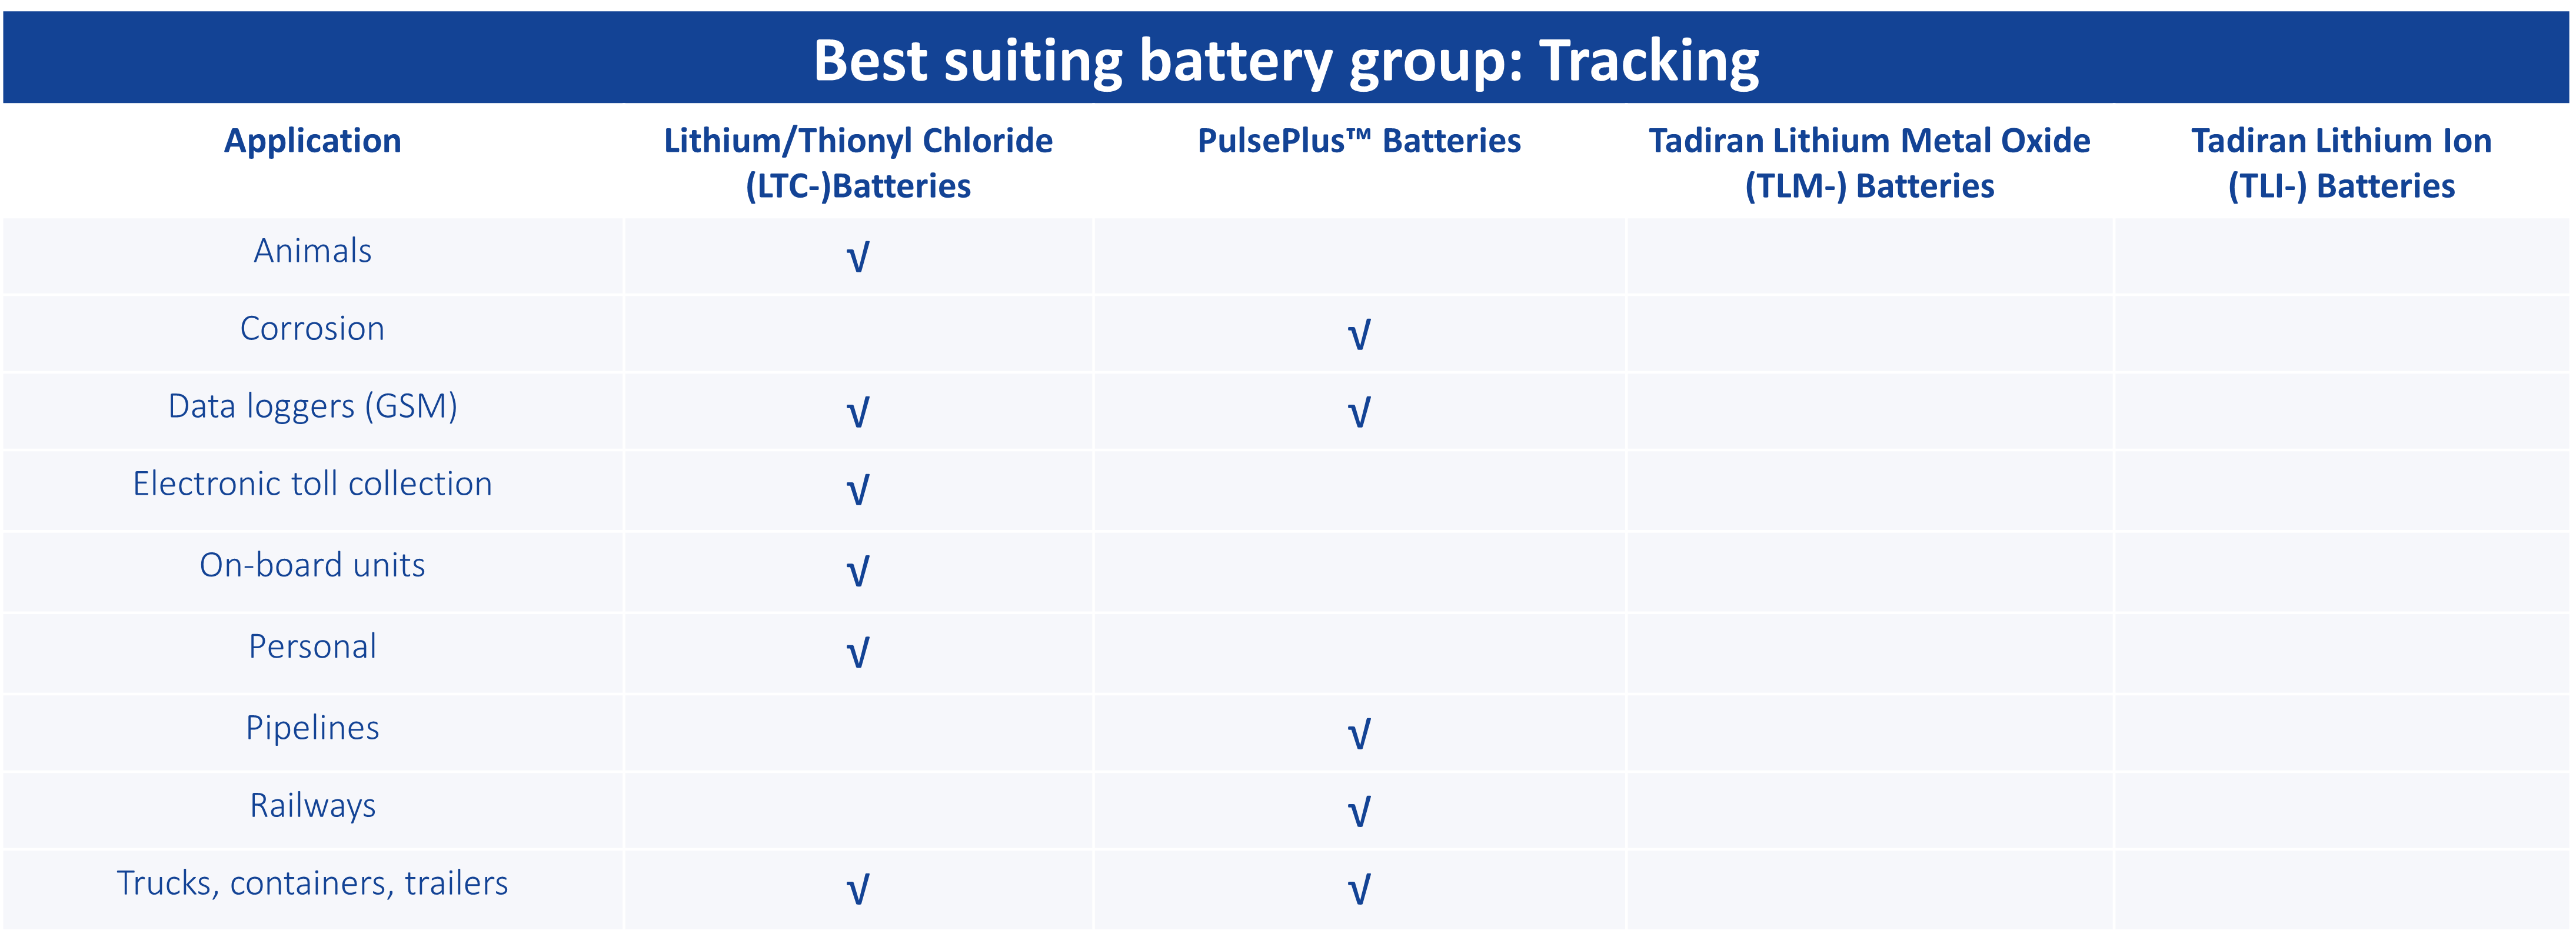 Batteries for Tracking Applications